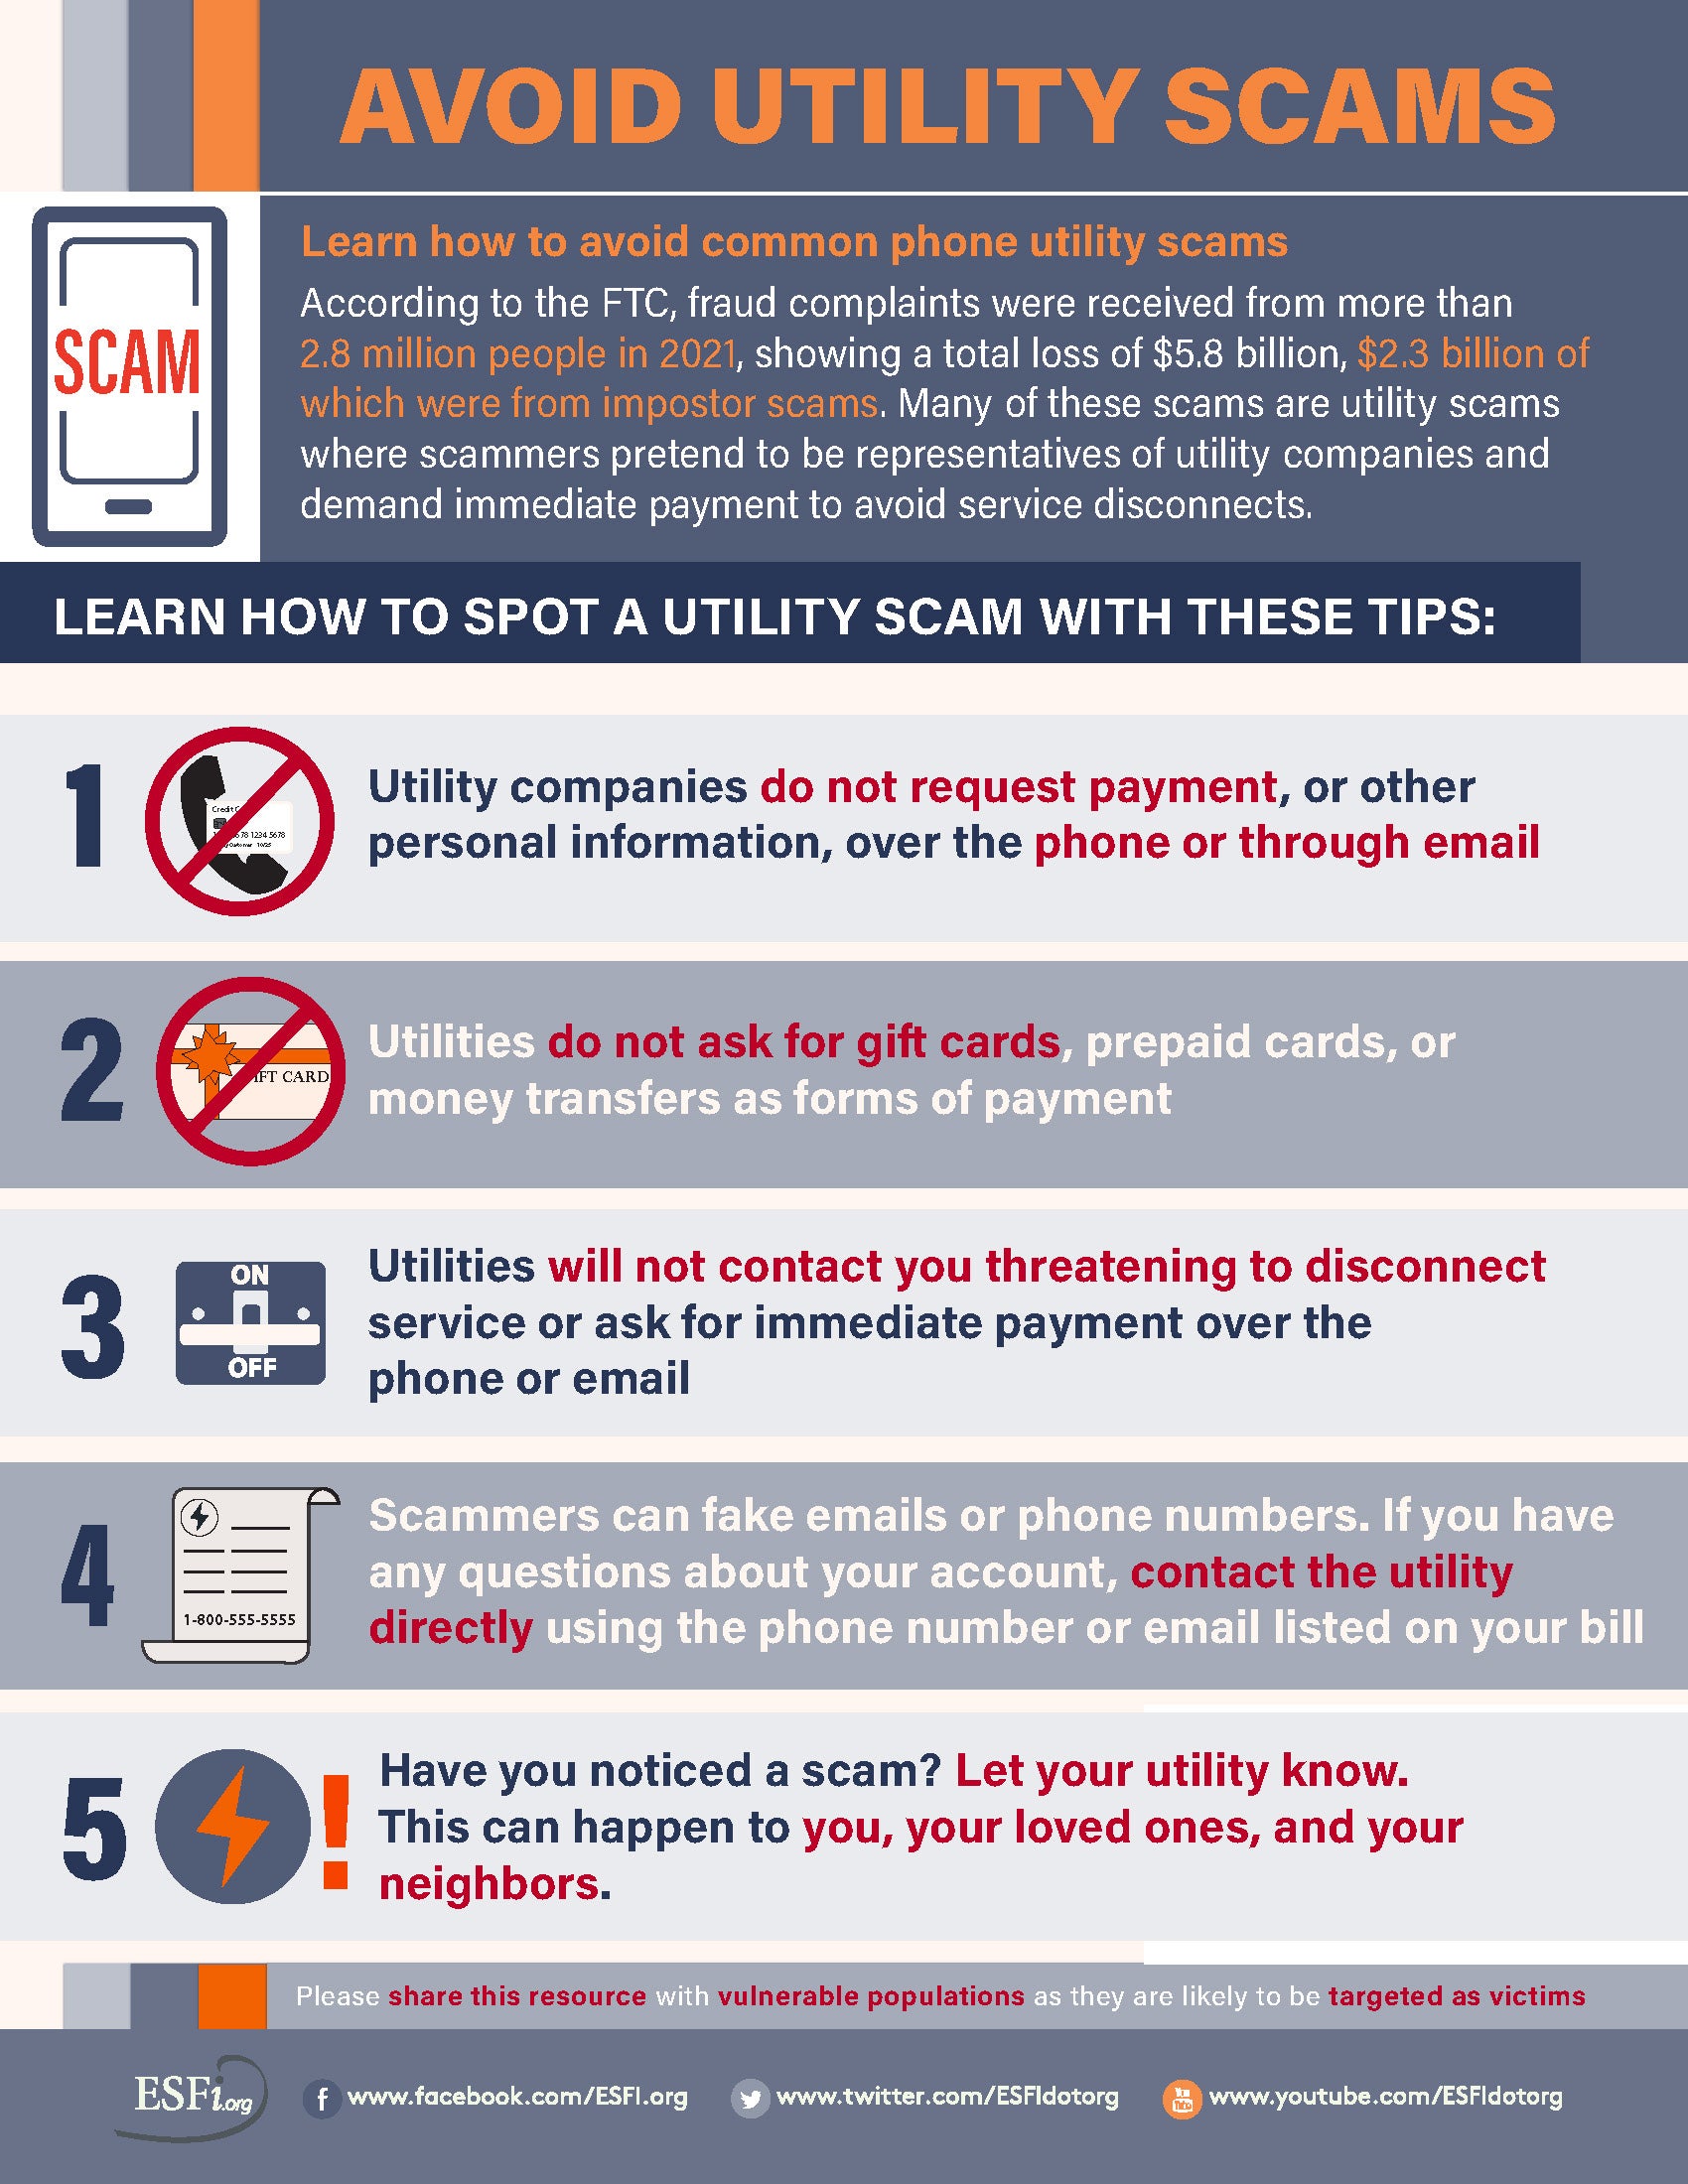 Image with tips to avoid utility scams